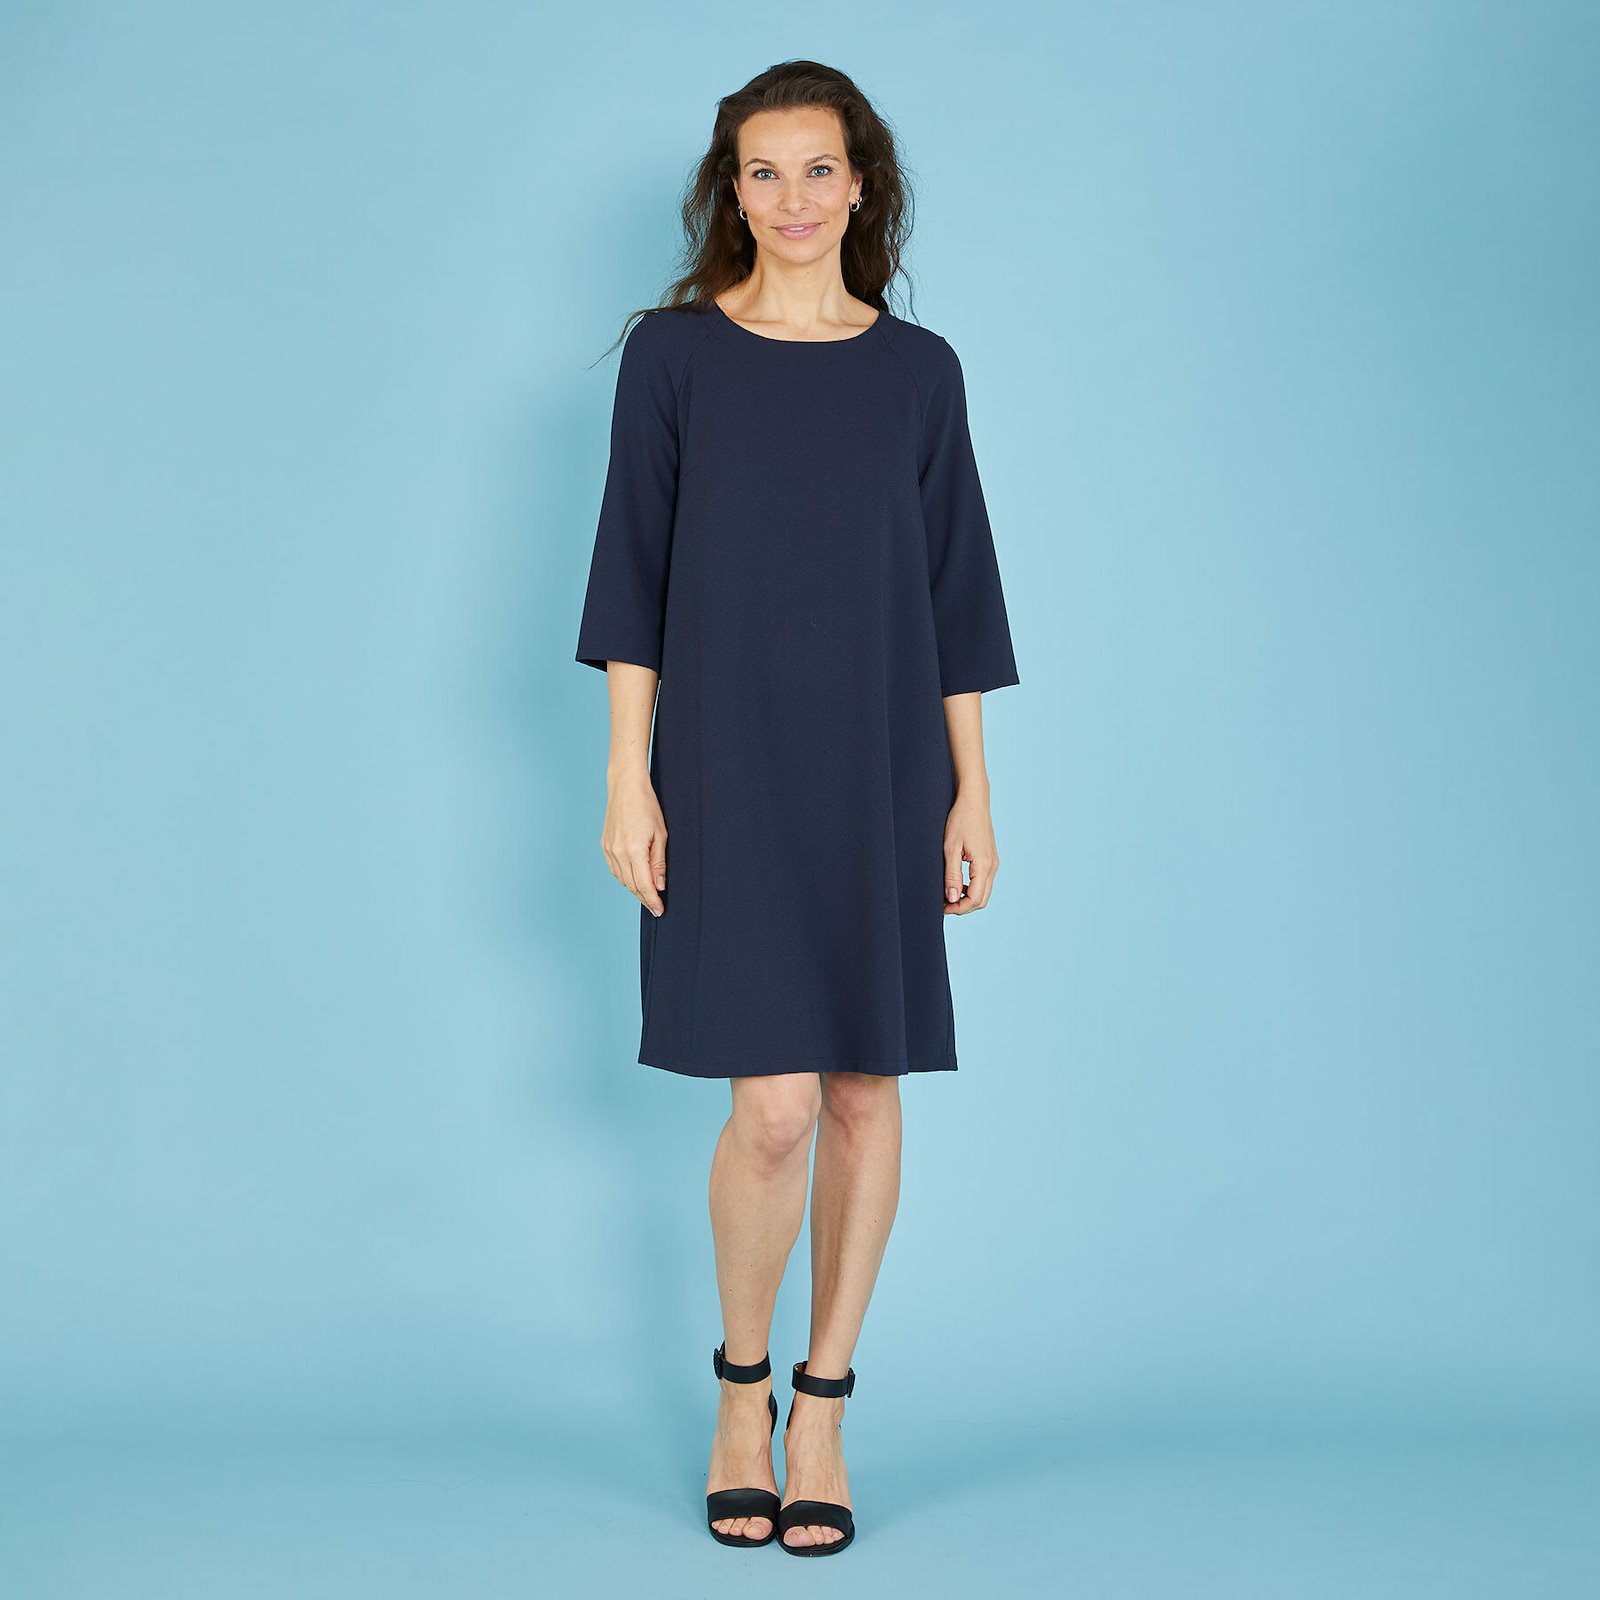 Dress with A-shape and raglan sle, 54/26 p23175000_p23175001_p23175002_p23175003_p23175004_pack_d